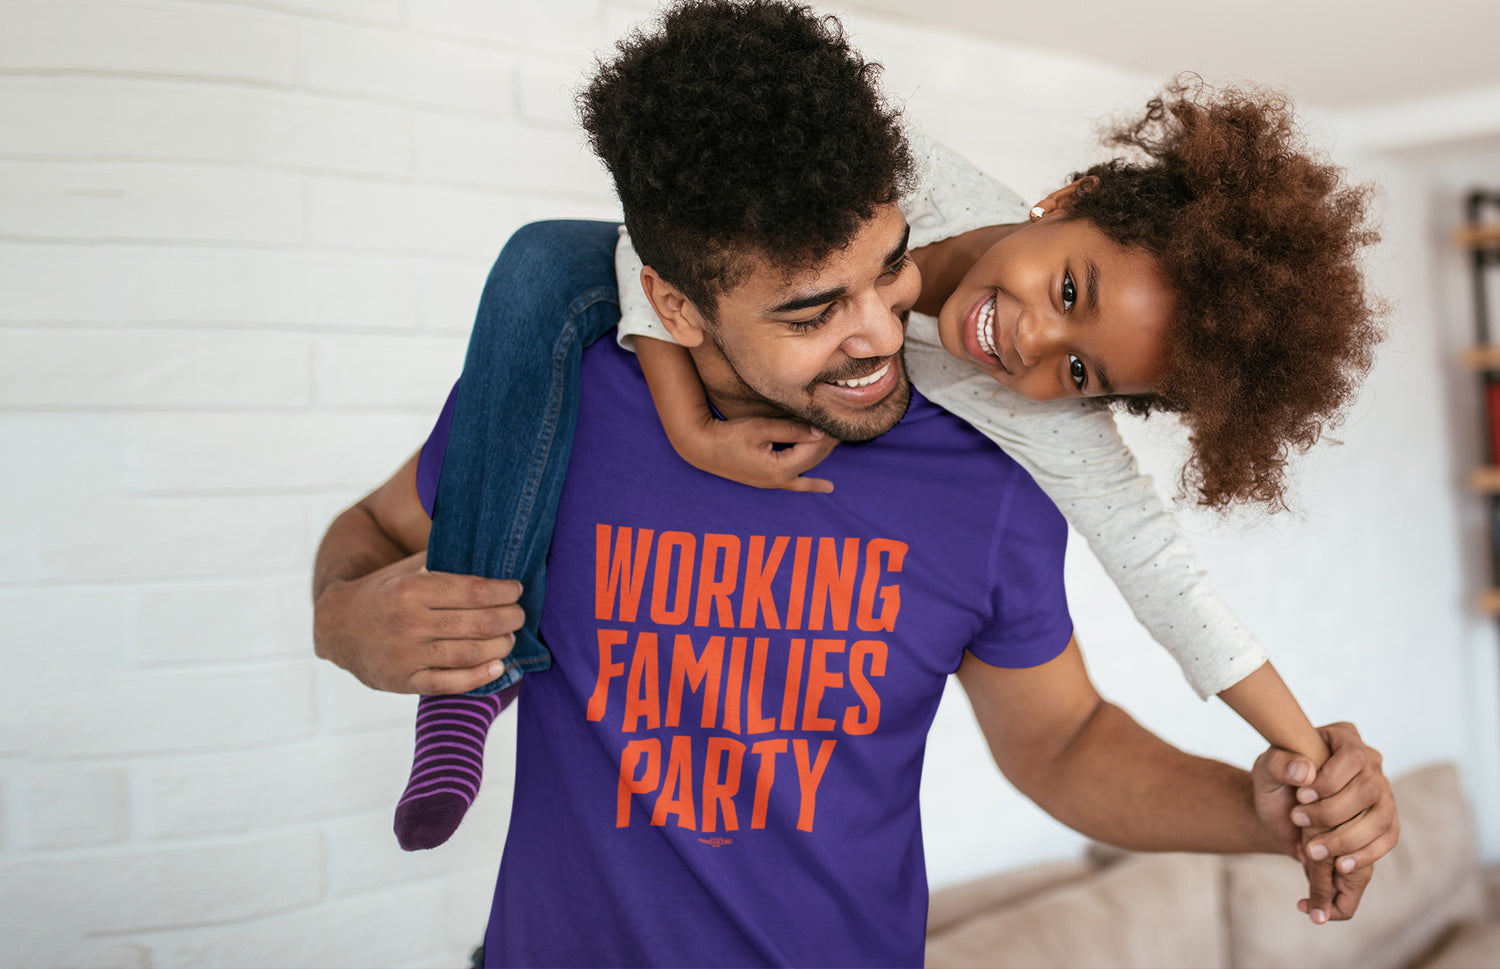 man in working families party t-shirt holding his daughter